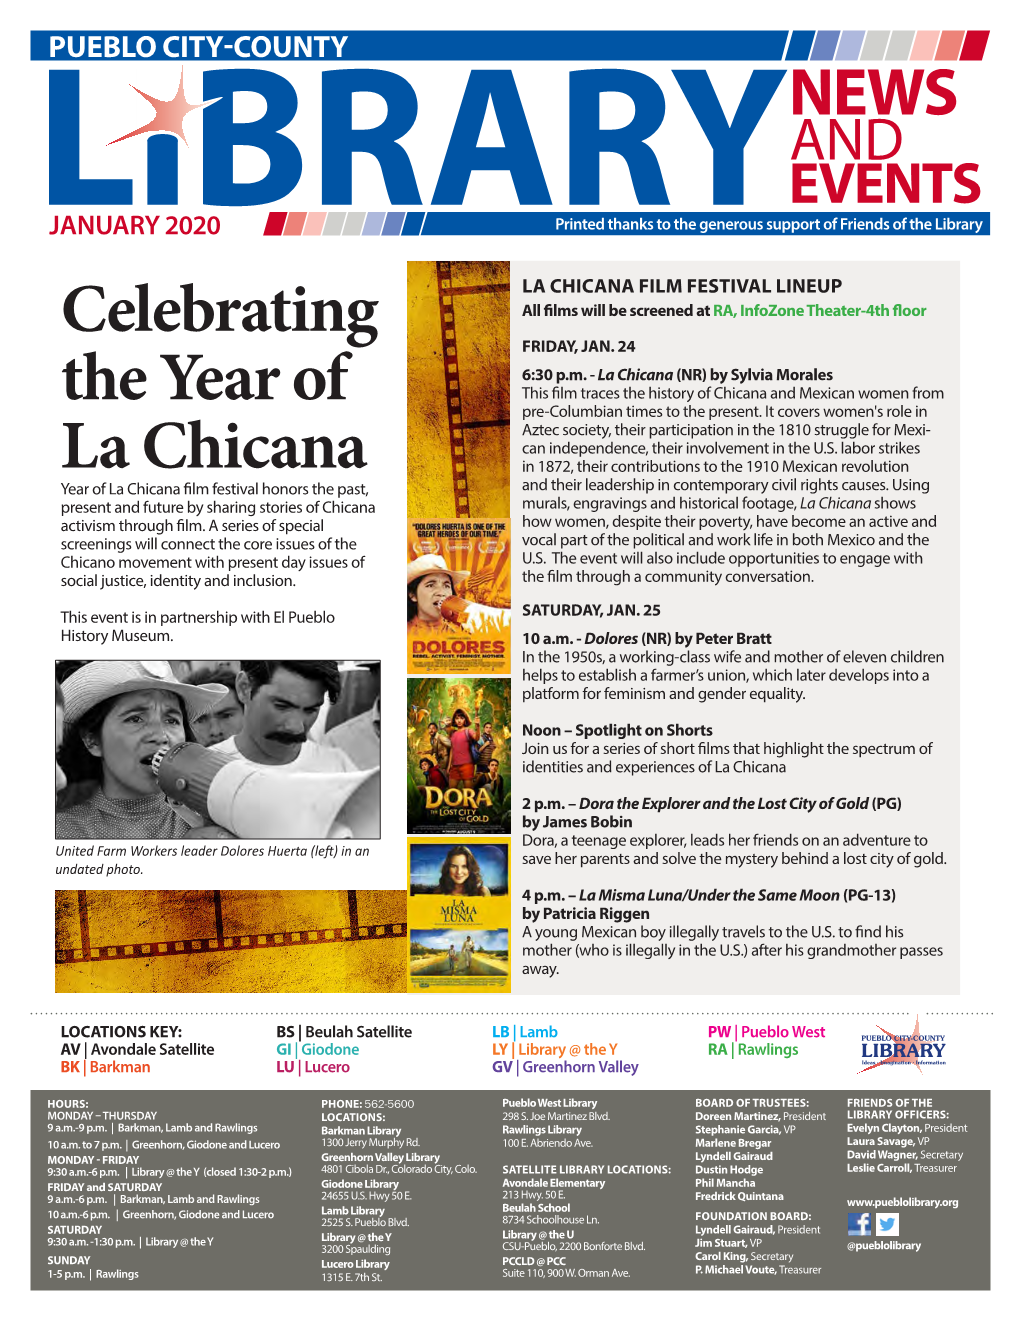 Celebrating the Year of La Chicana